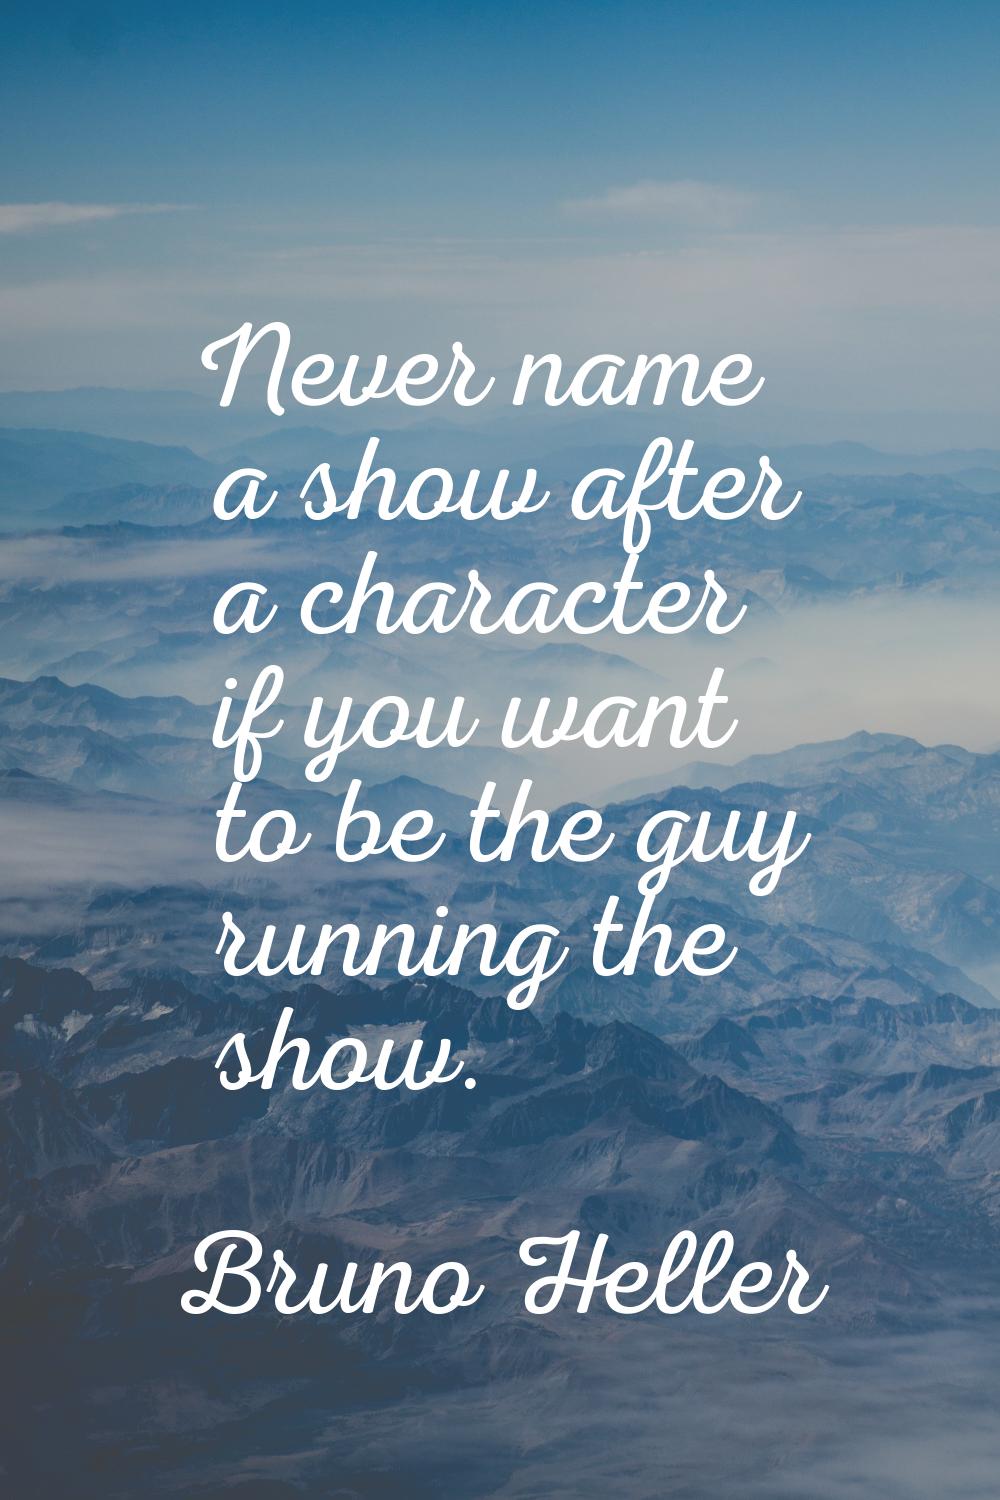 Never name a show after a character if you want to be the guy running the show.